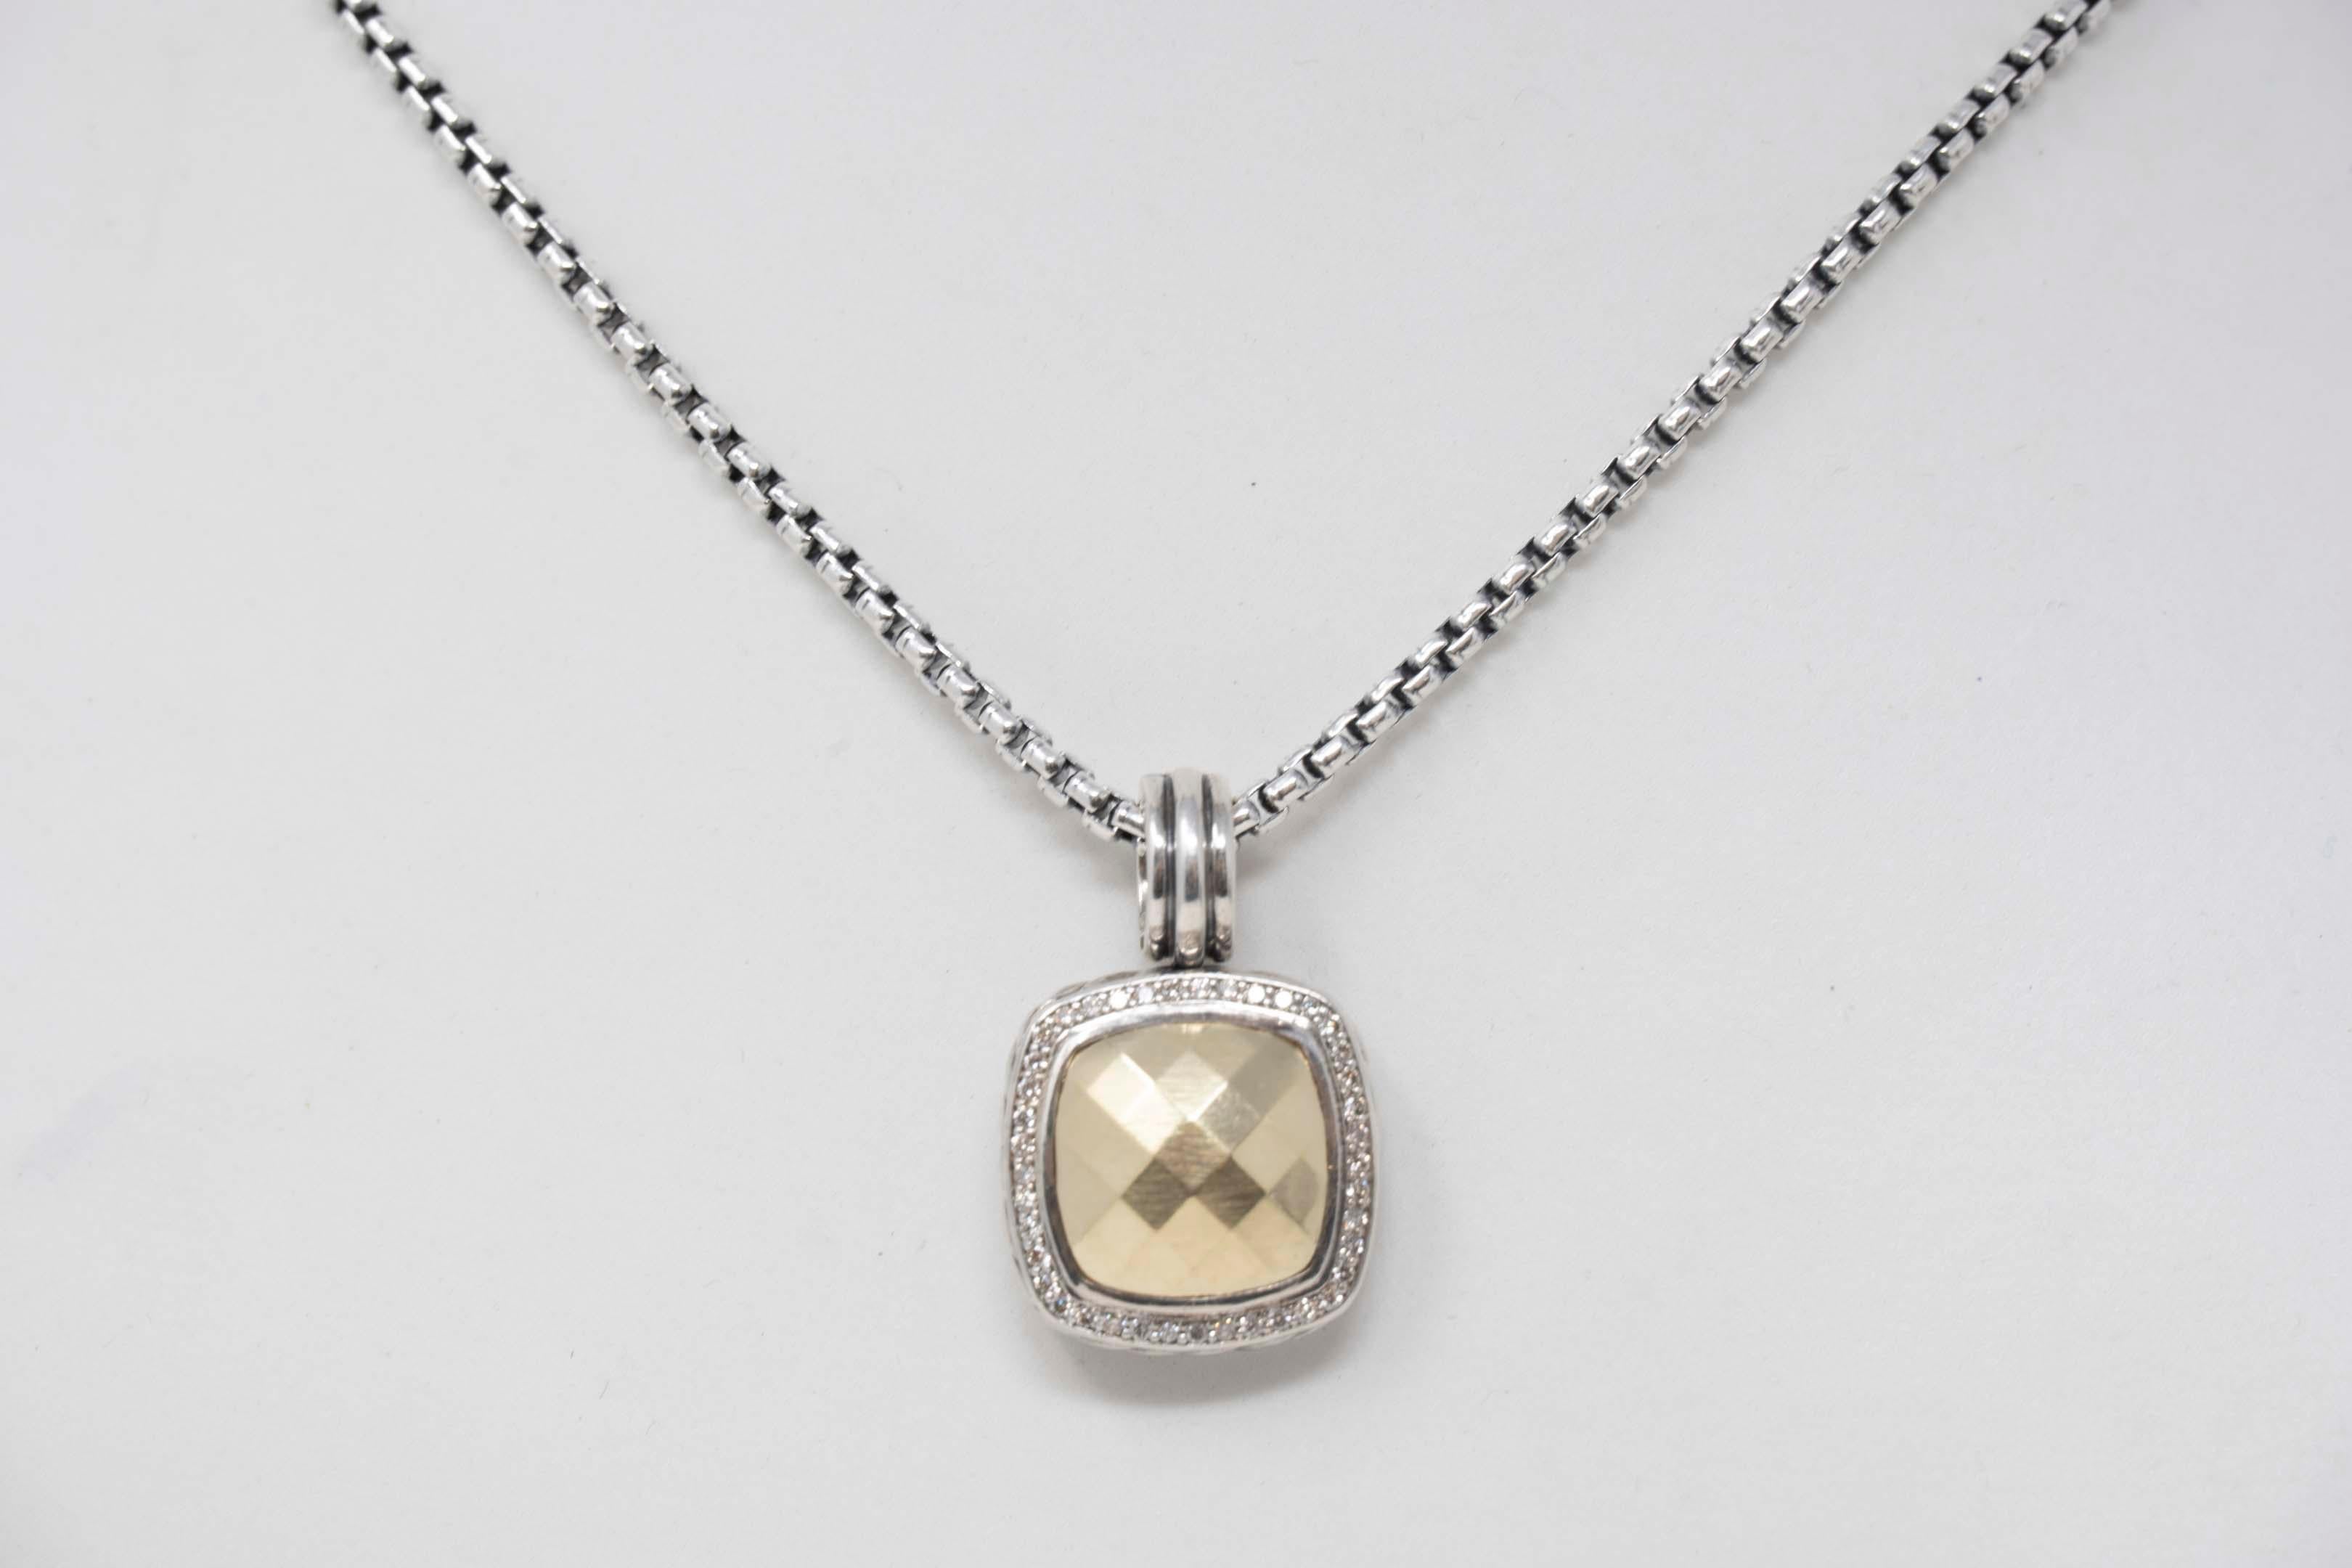 David Yurman 925 silver & 18k yellow gold faceted gold dome pendant, 21mm x 21mm top, set with 42 diamonds, 17 inches long chain included, pendant marked DY 925 1/4 750 chain marked DY 925, 585. Good condition, 21st century total weight 24.8 grams.
